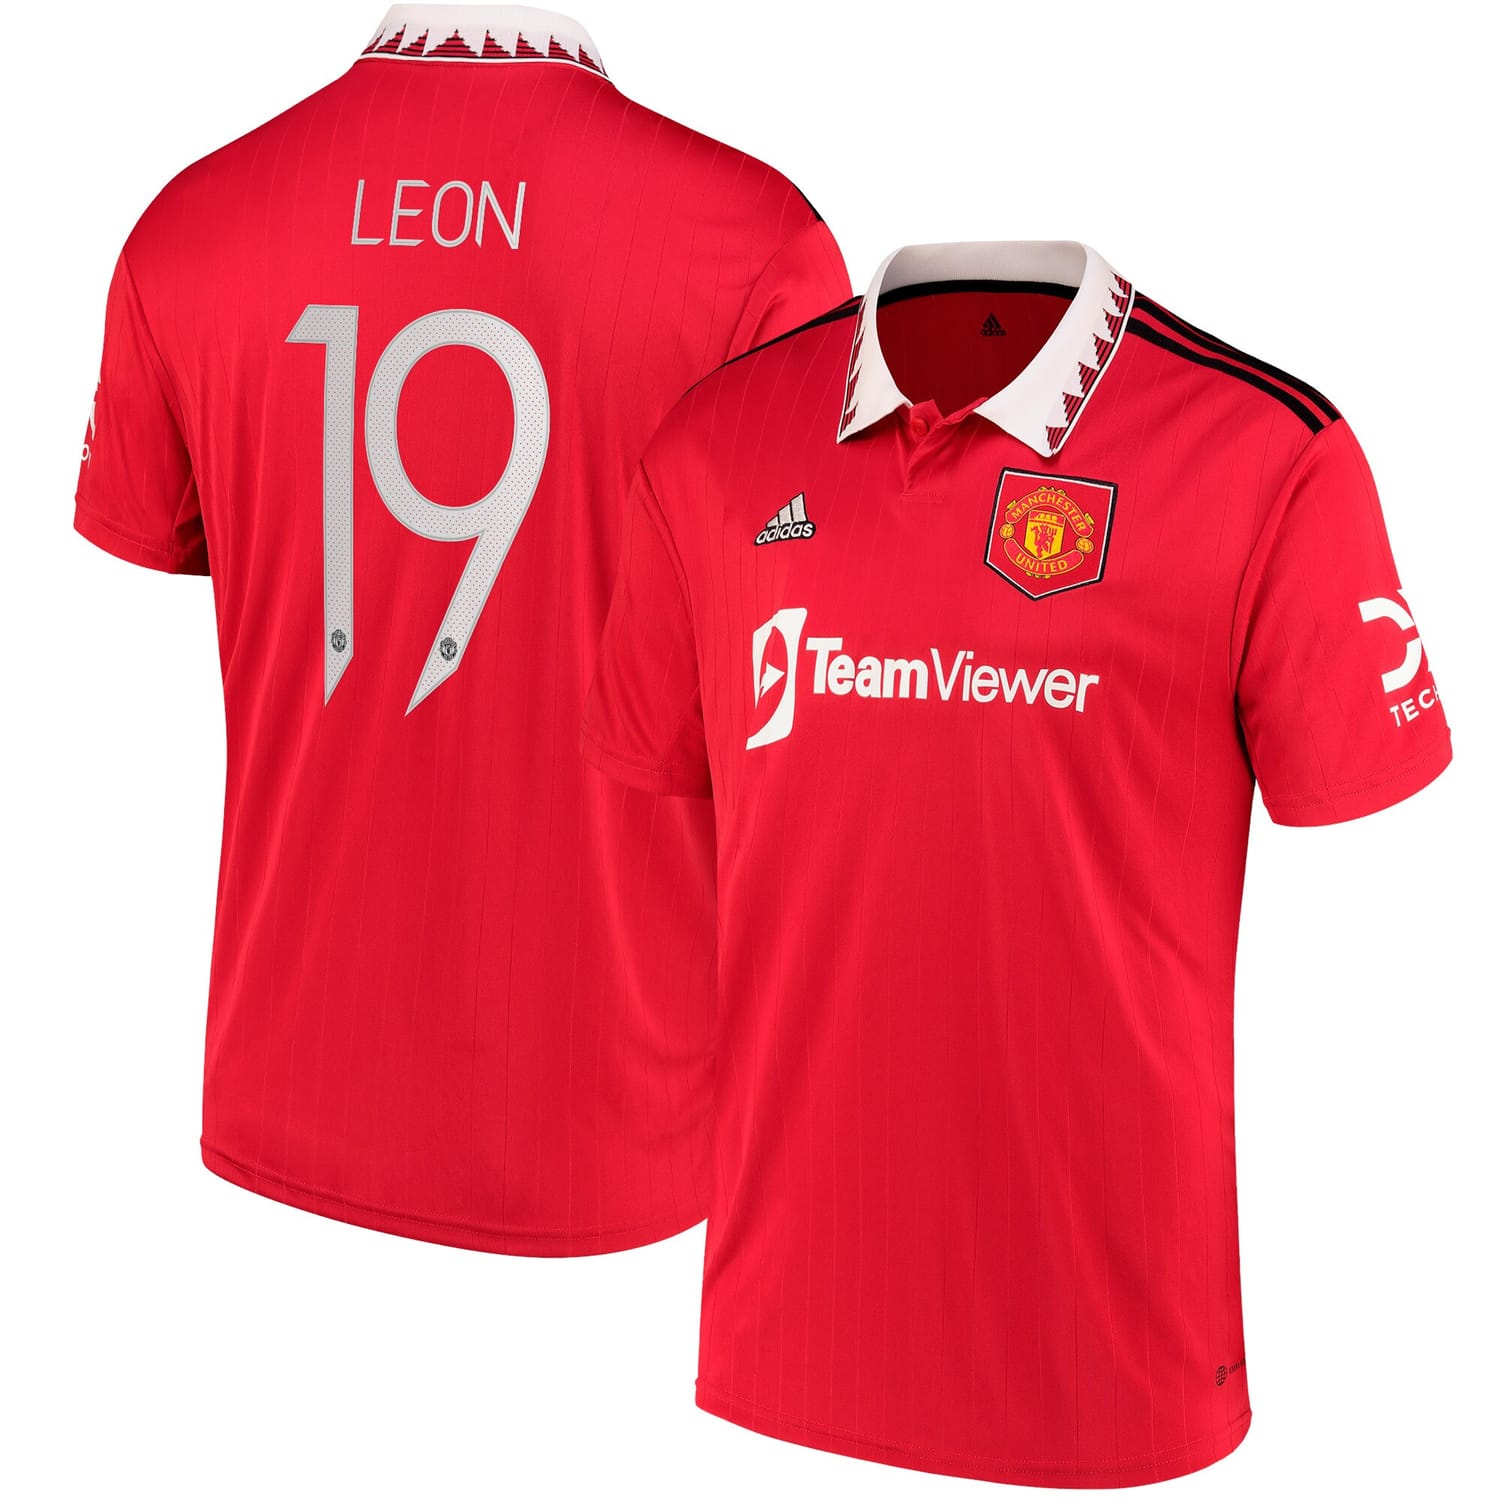 Premier League Manchester United Home Cup Jersey Shirt 2022-23 player Adriana Leon 19 printing for Men